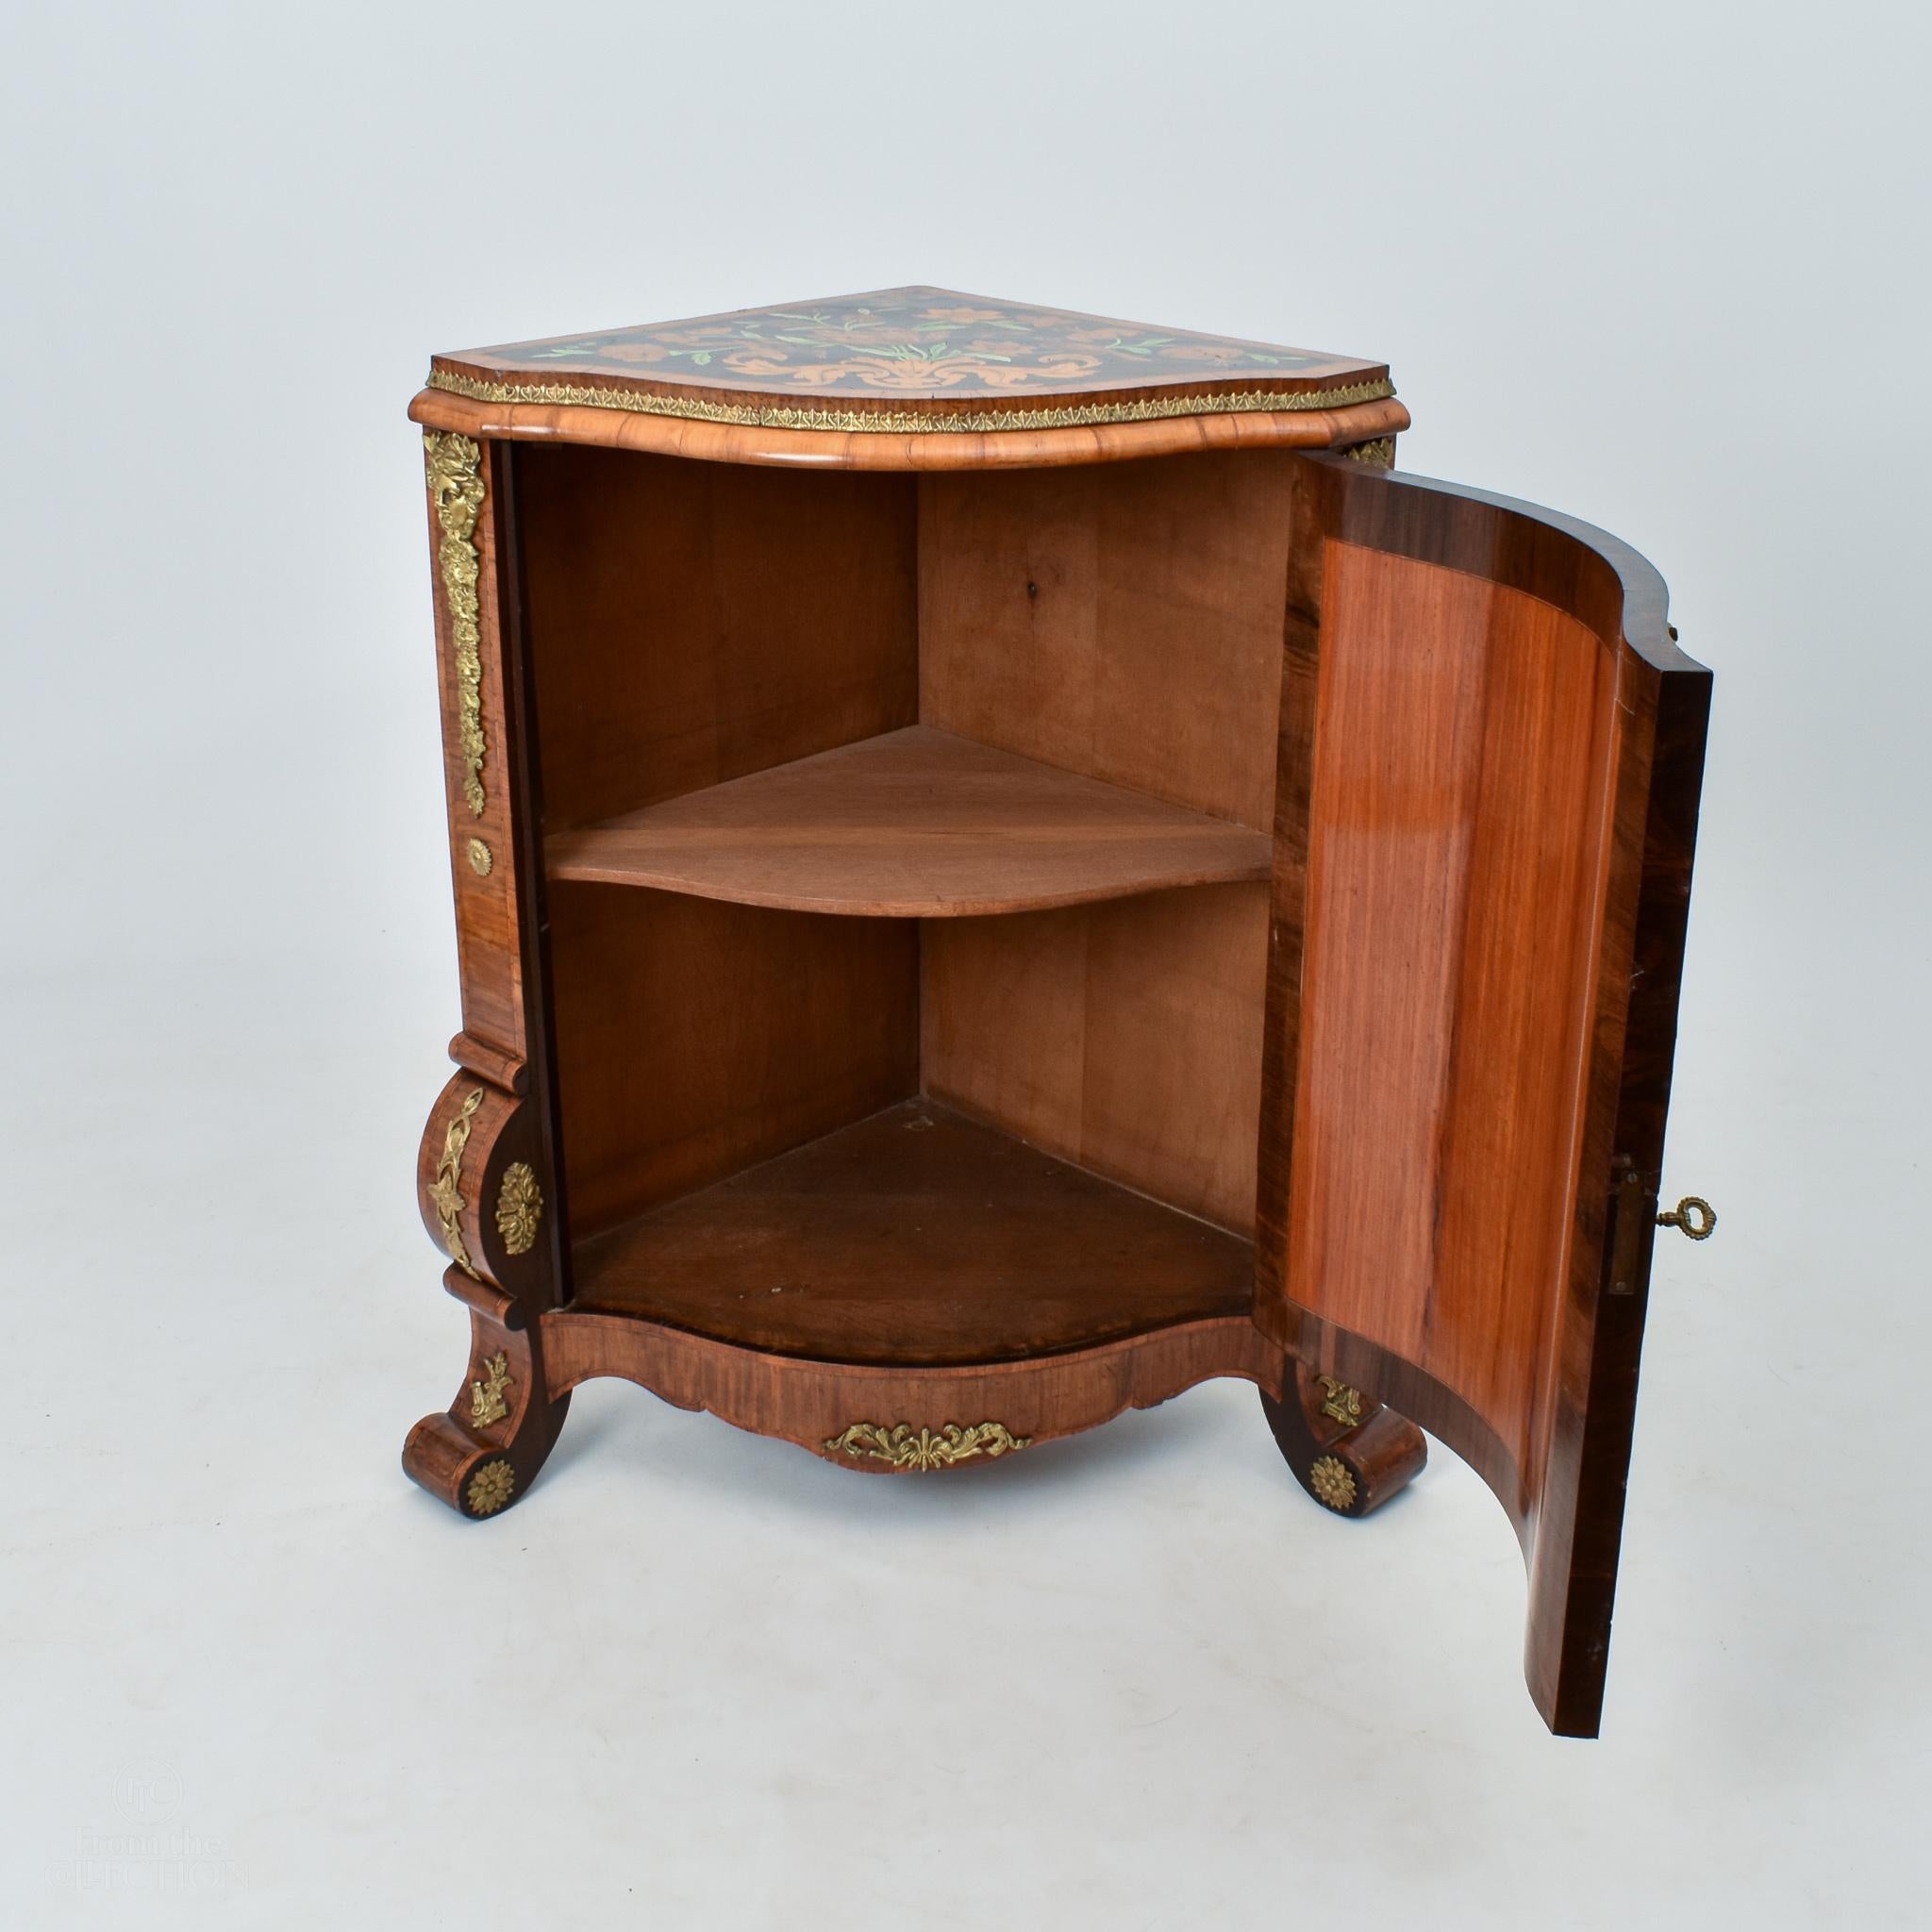 Extremely Rare Marquetry Corner Cabinets, Ormalu Mount, circa 1880 For Sale 2